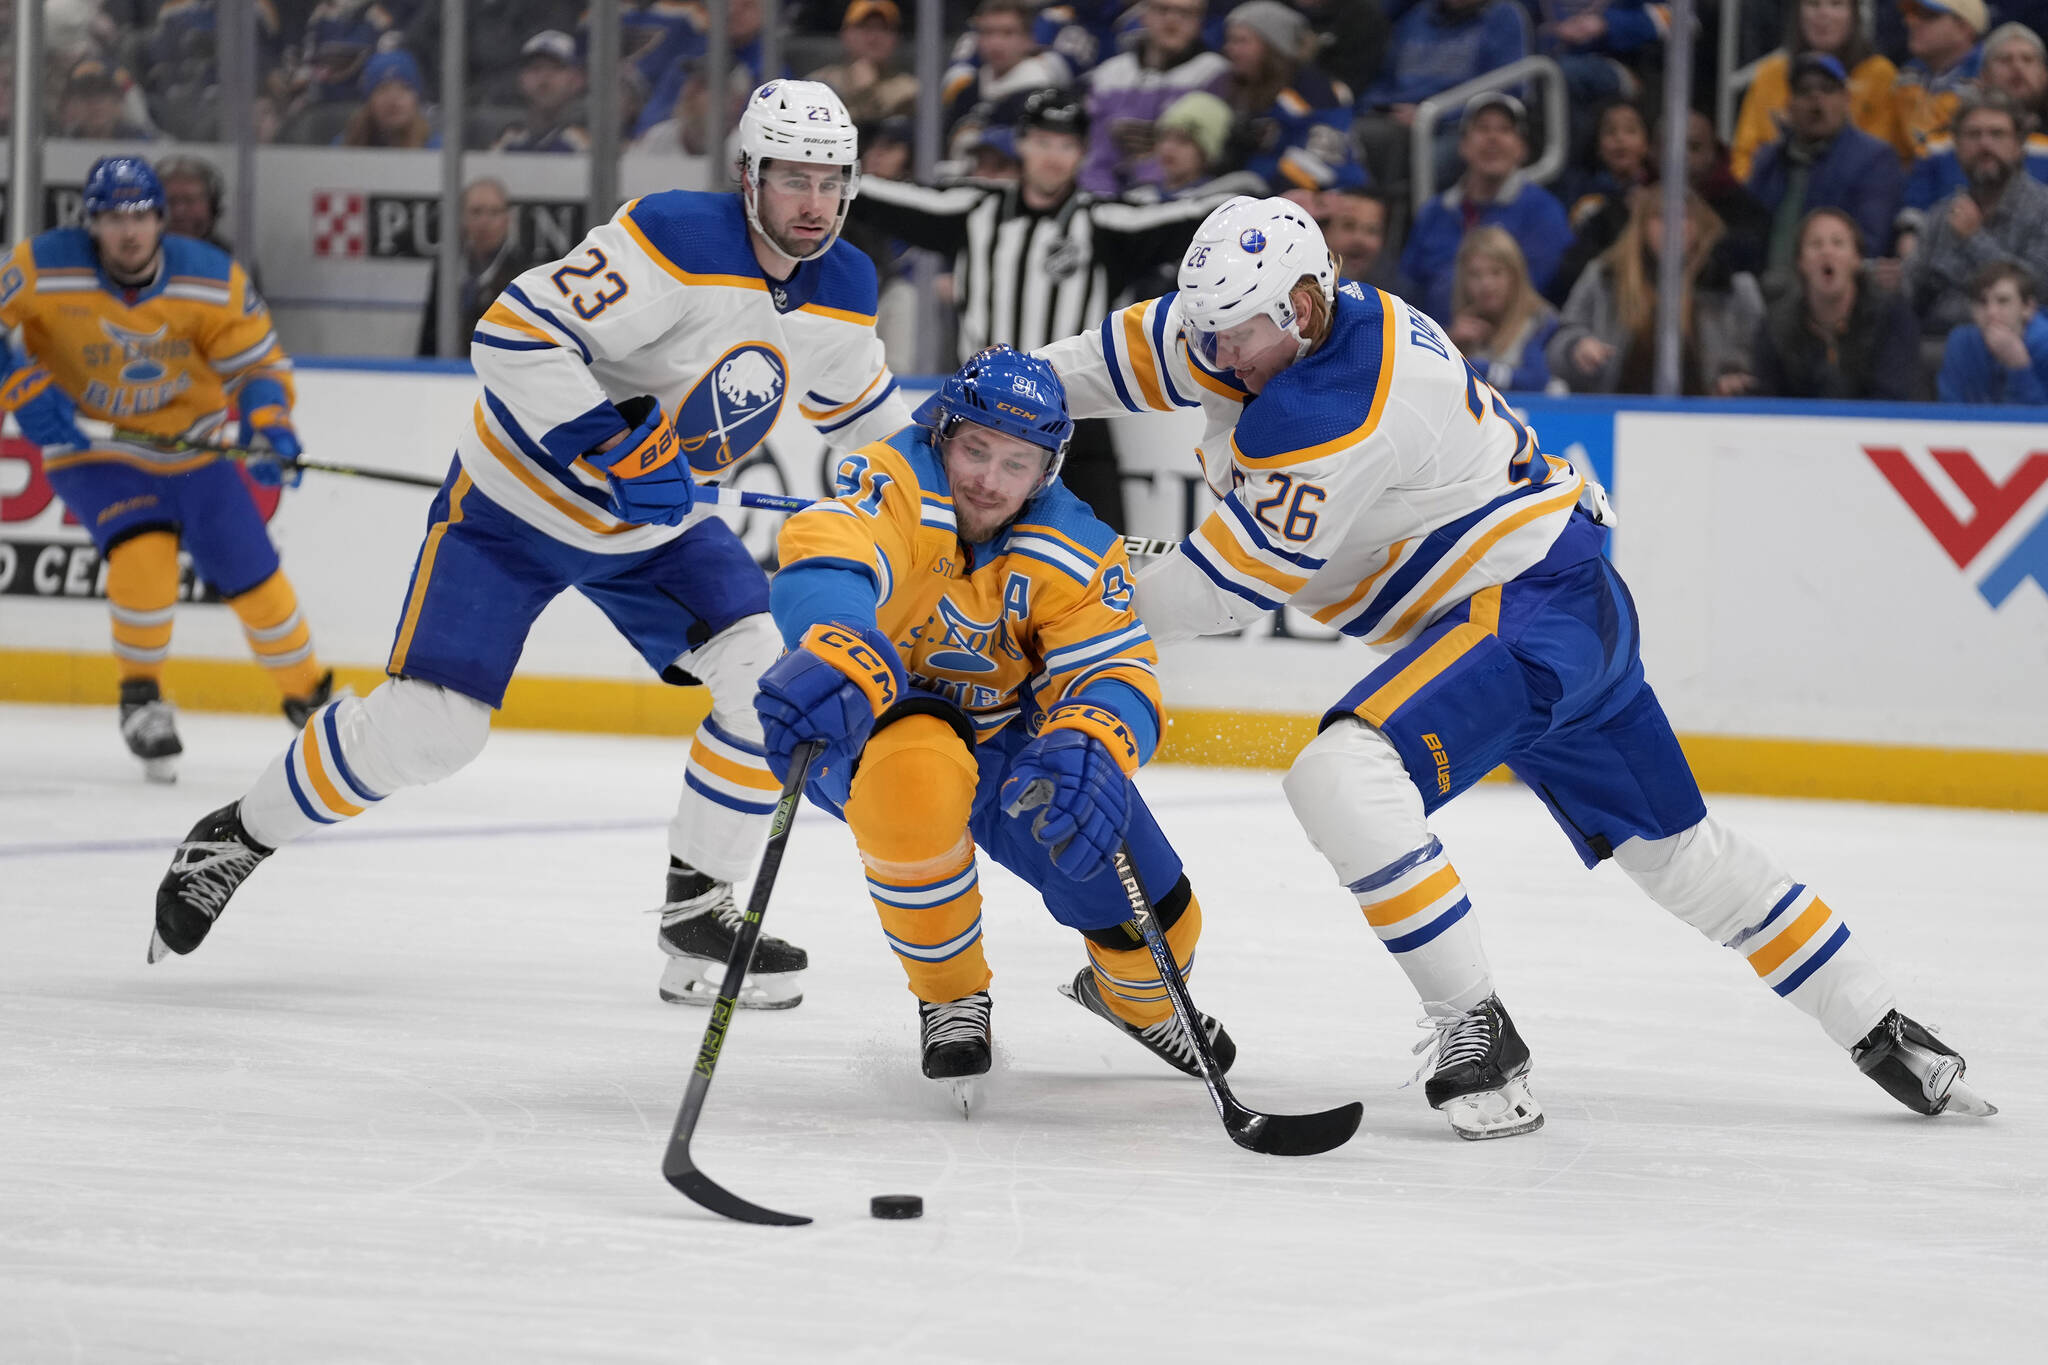 St. Louis Blues’ Vladimir Tarasenko (91) reaches for a loose puck as Buffalo Sabres’ Rasmus Dahlin (26) and Mattias Samuelsson (23) defend during the second period of an NHL hockey game Tuesday, Jan. 24, 2023, in St. Louis. (AP Photo/Jeff Roberson)